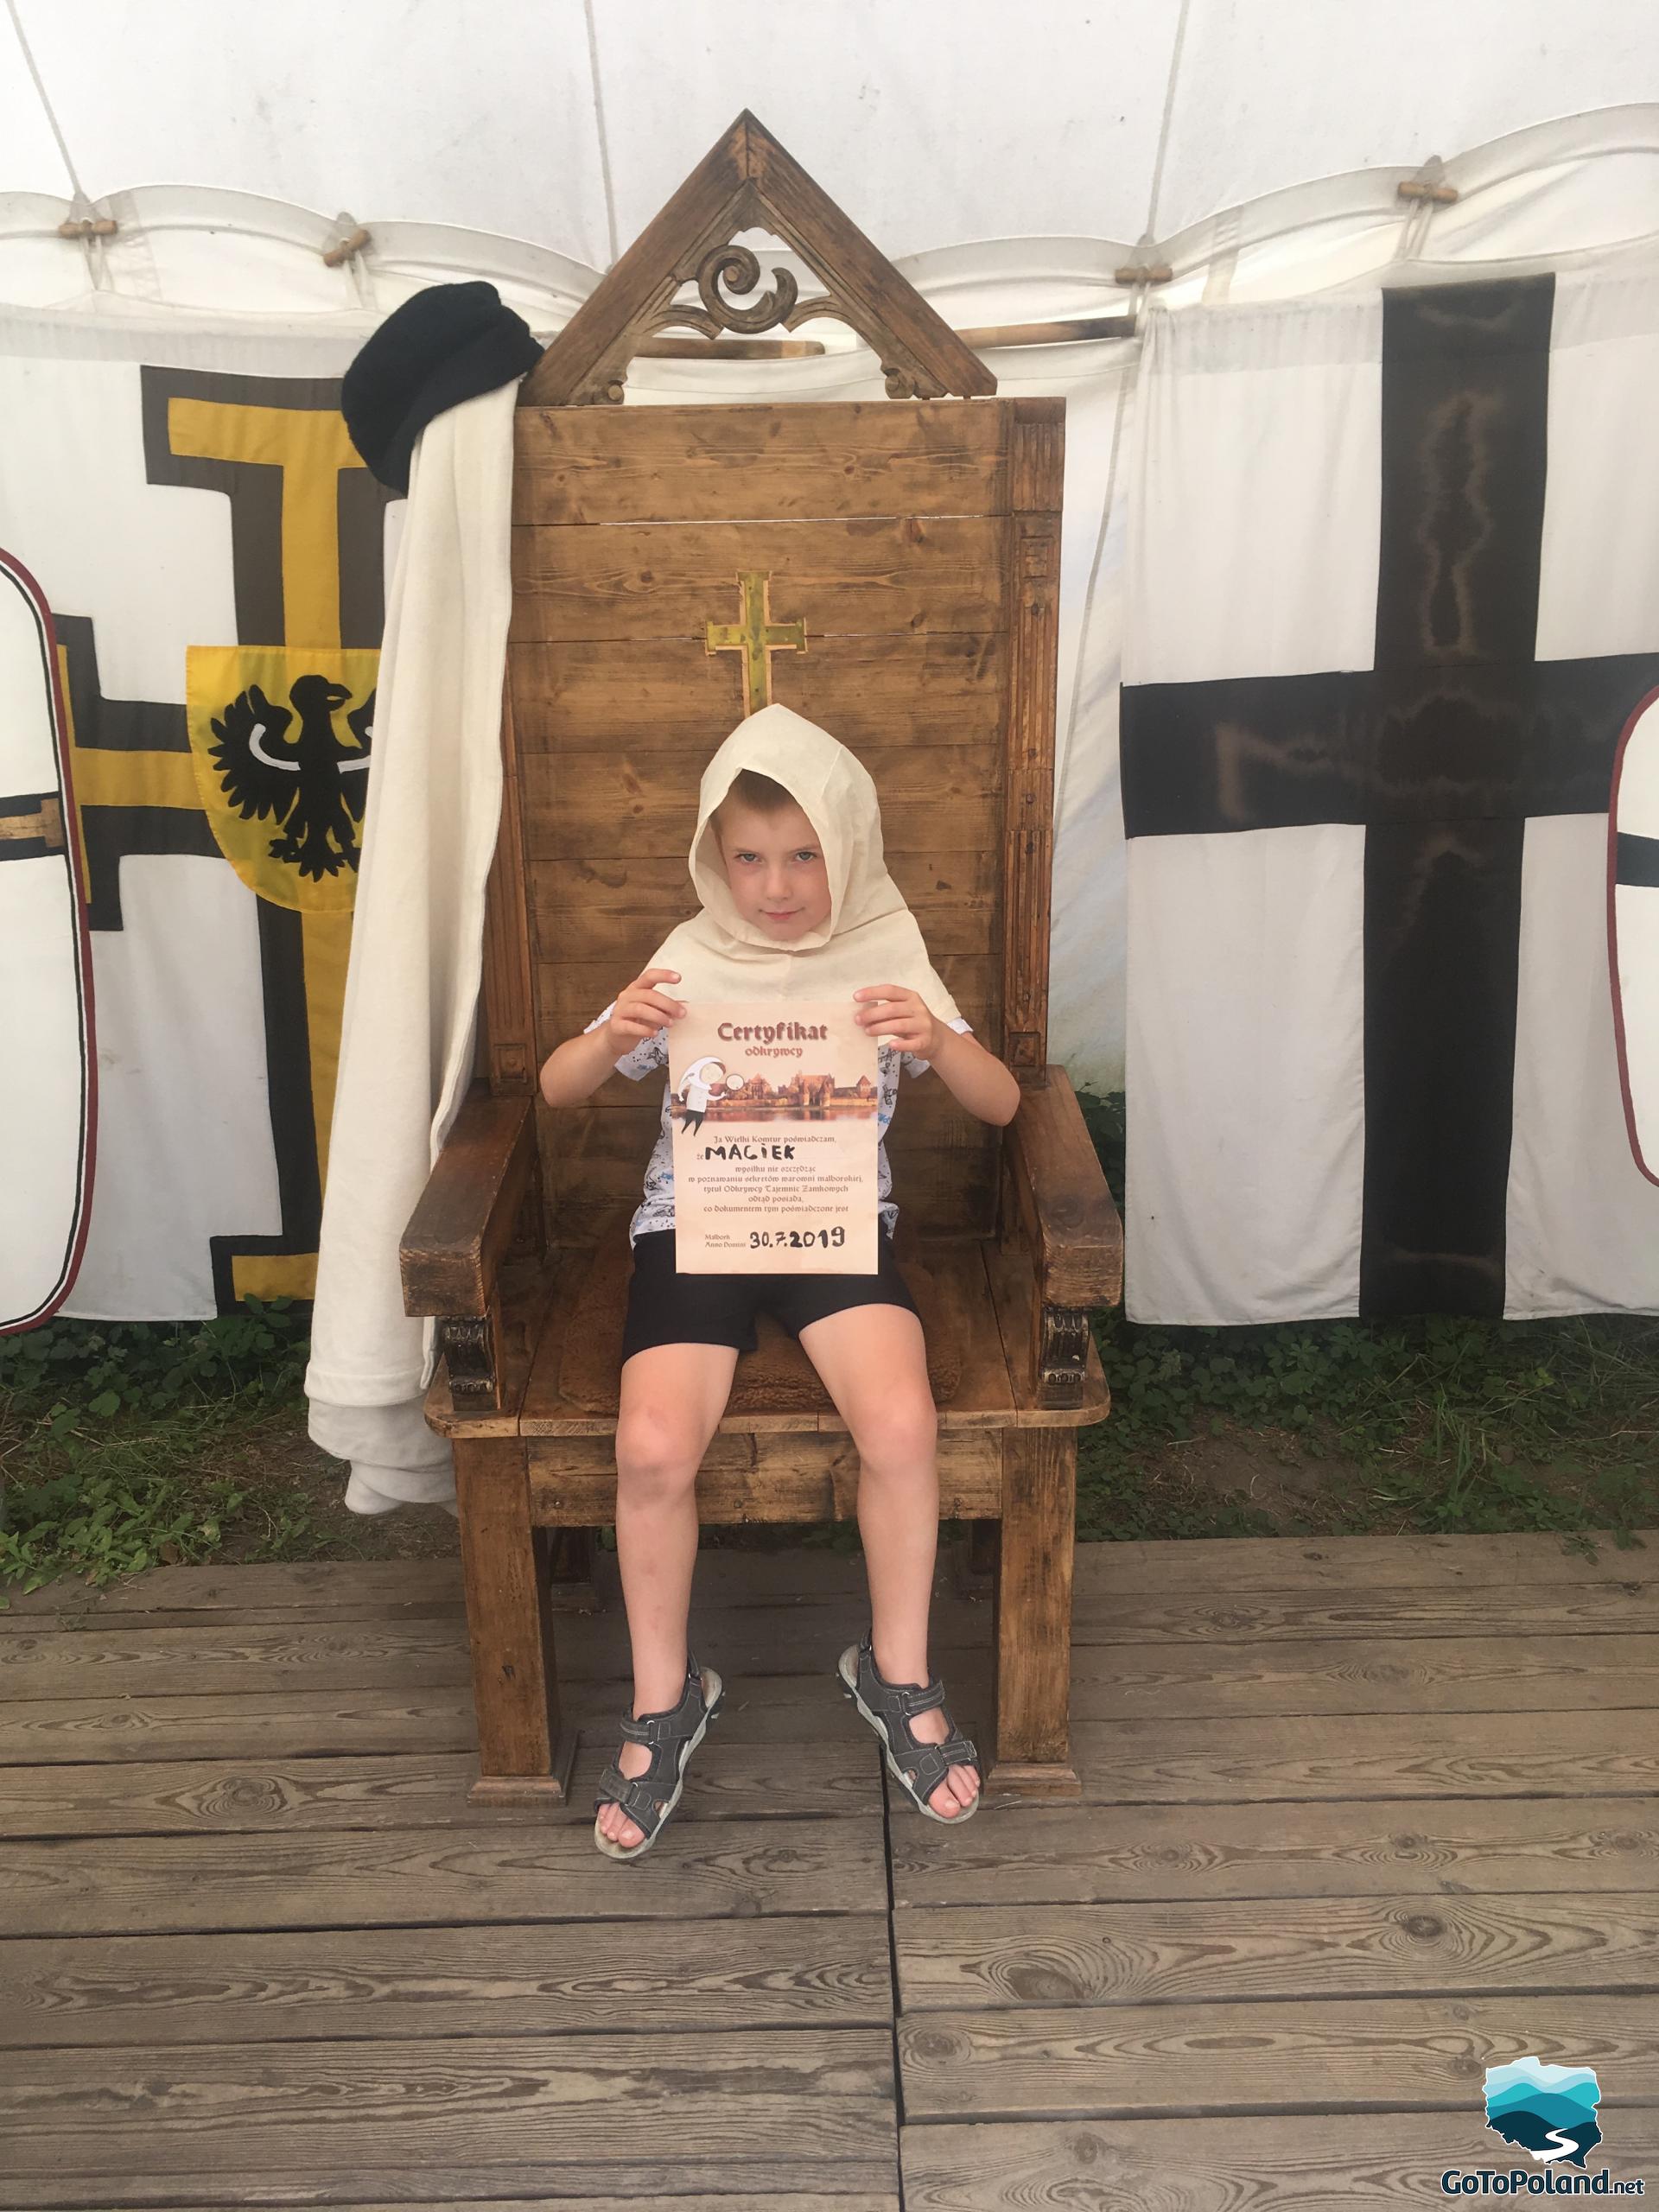 a boy is sitting on a wooden chair and holding a certificate of a discoverer